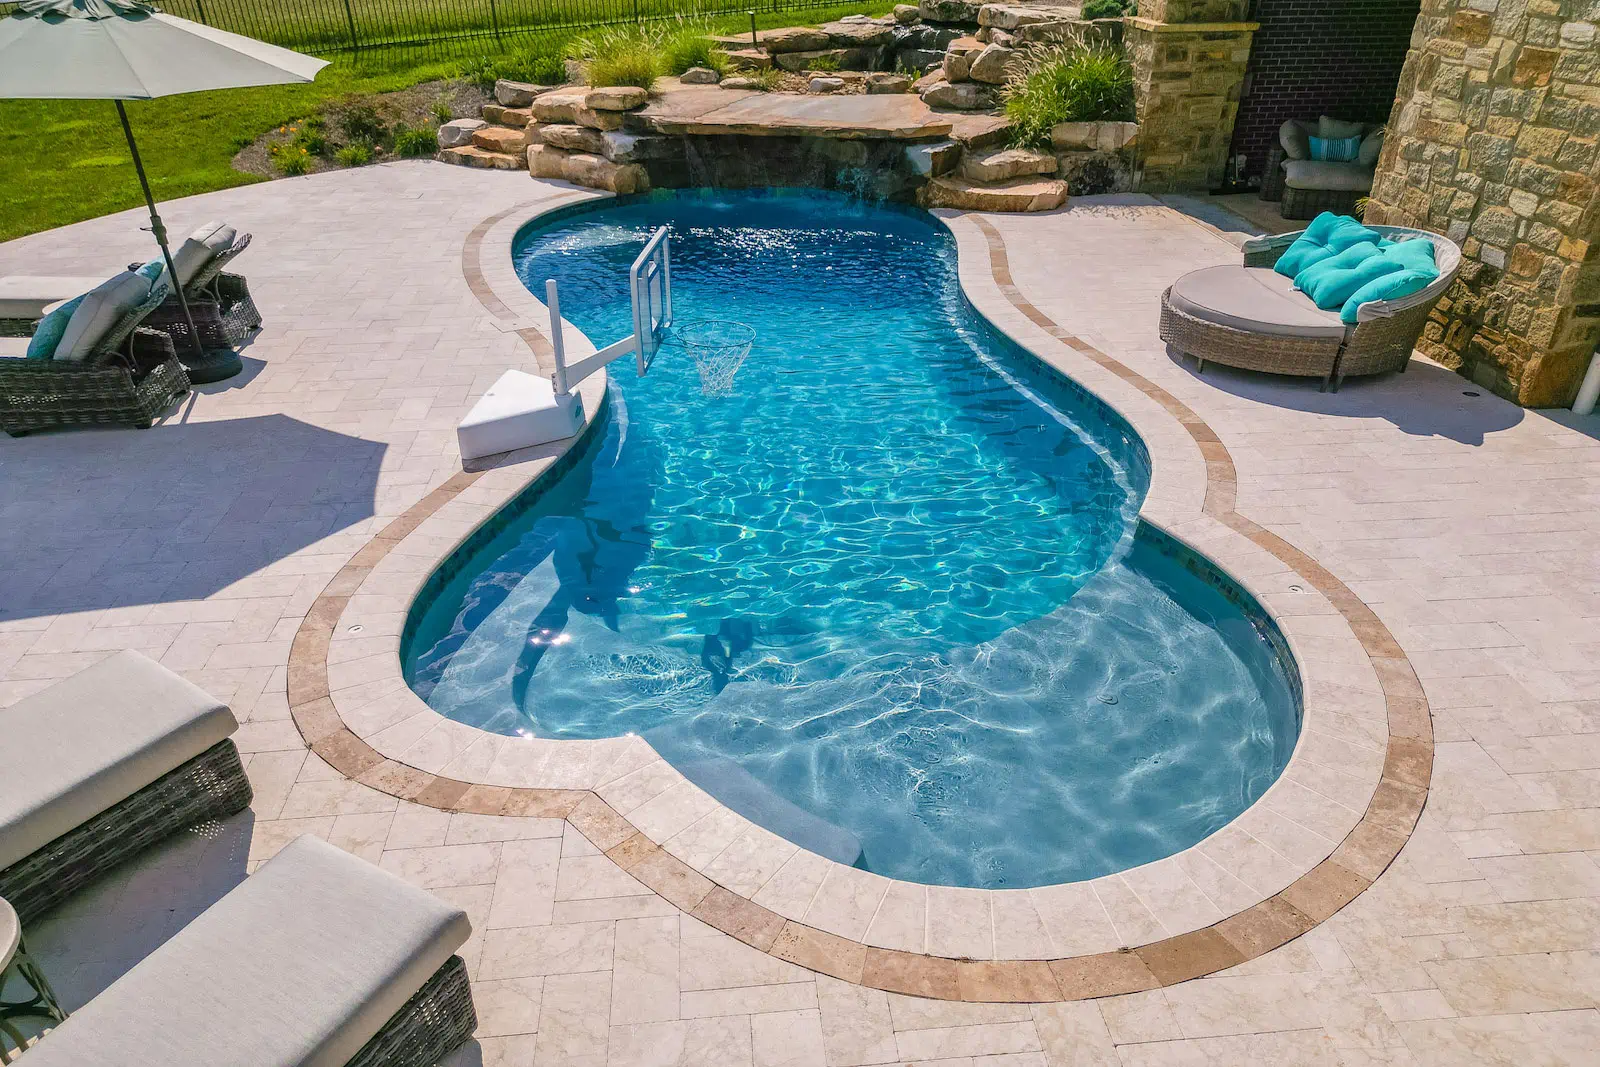 Leisure Pools Eclipse™ - a superb inground pool installation - from our fiberglass pool gallery